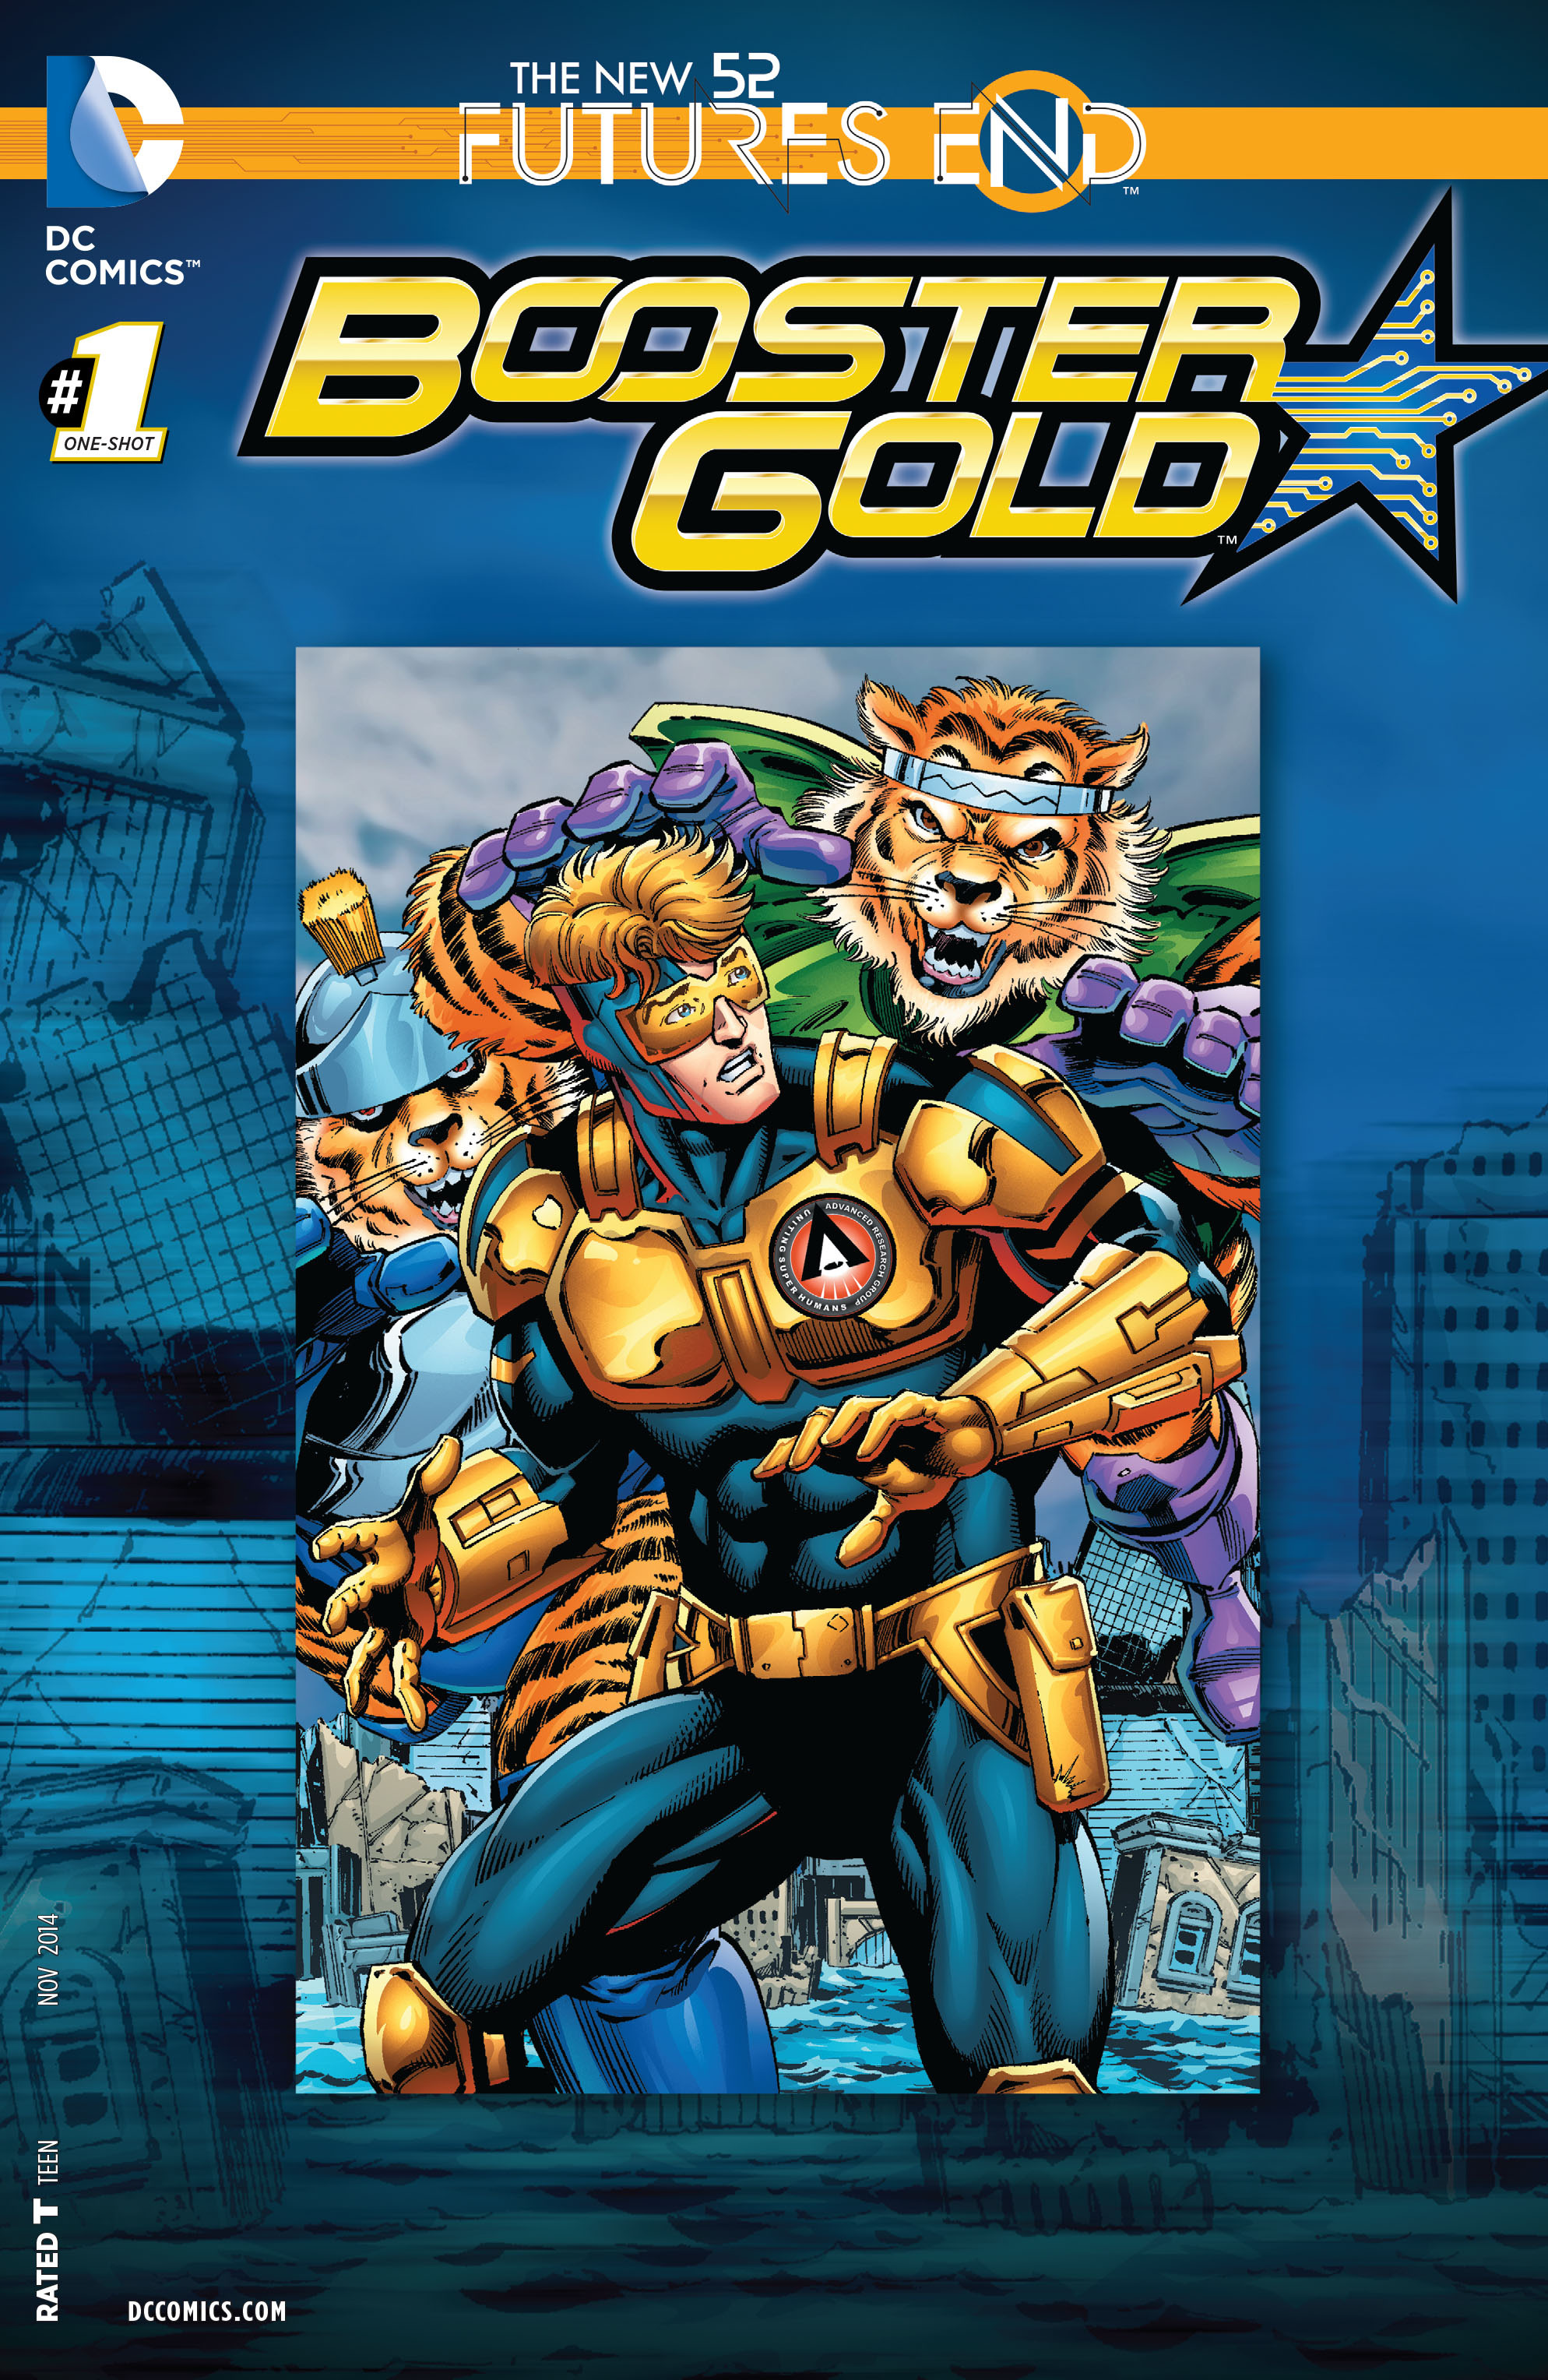 2014 DC COMICS BOOSTER GOLD  FUTURE'S END #1-3D COVER 